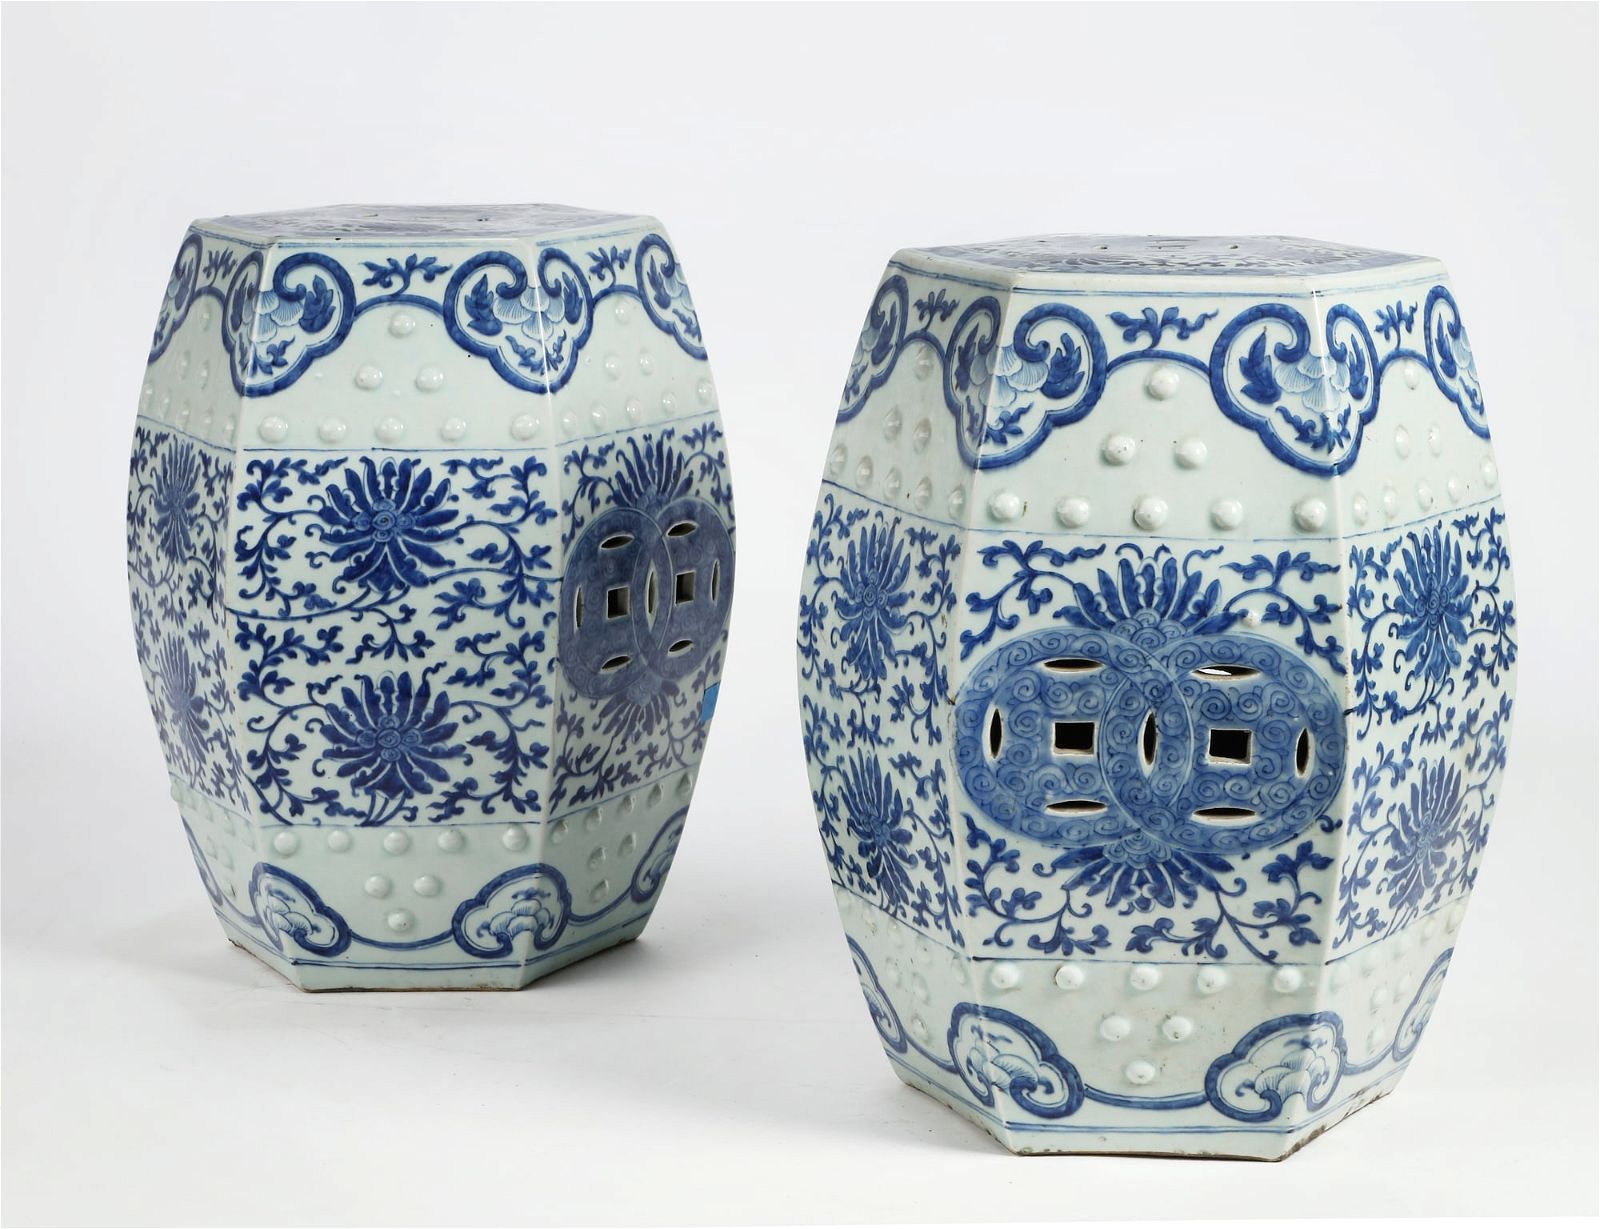 A PAIR OF CHINESE GLAZED CERAMIC